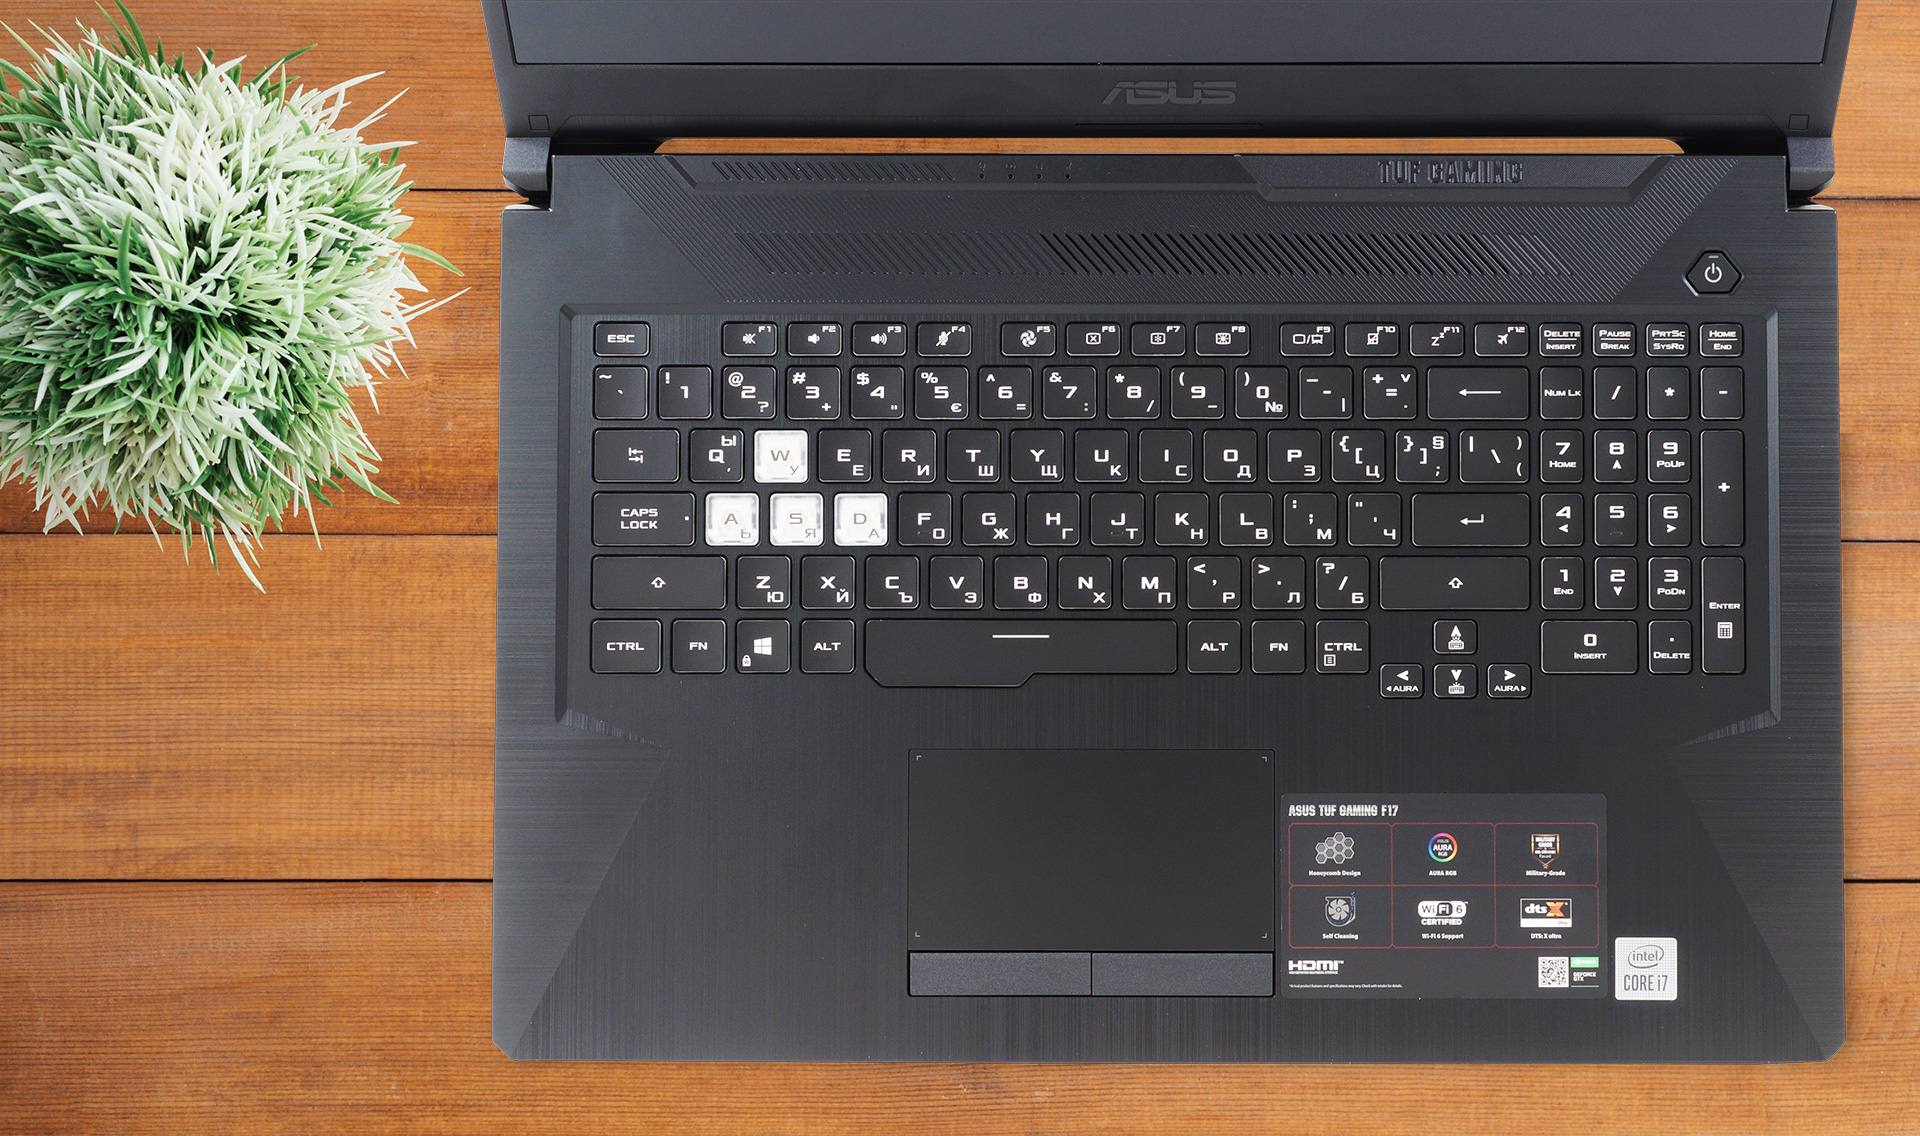 ASUS TUF Gaming F17 (FX706) review - big boy with a low price